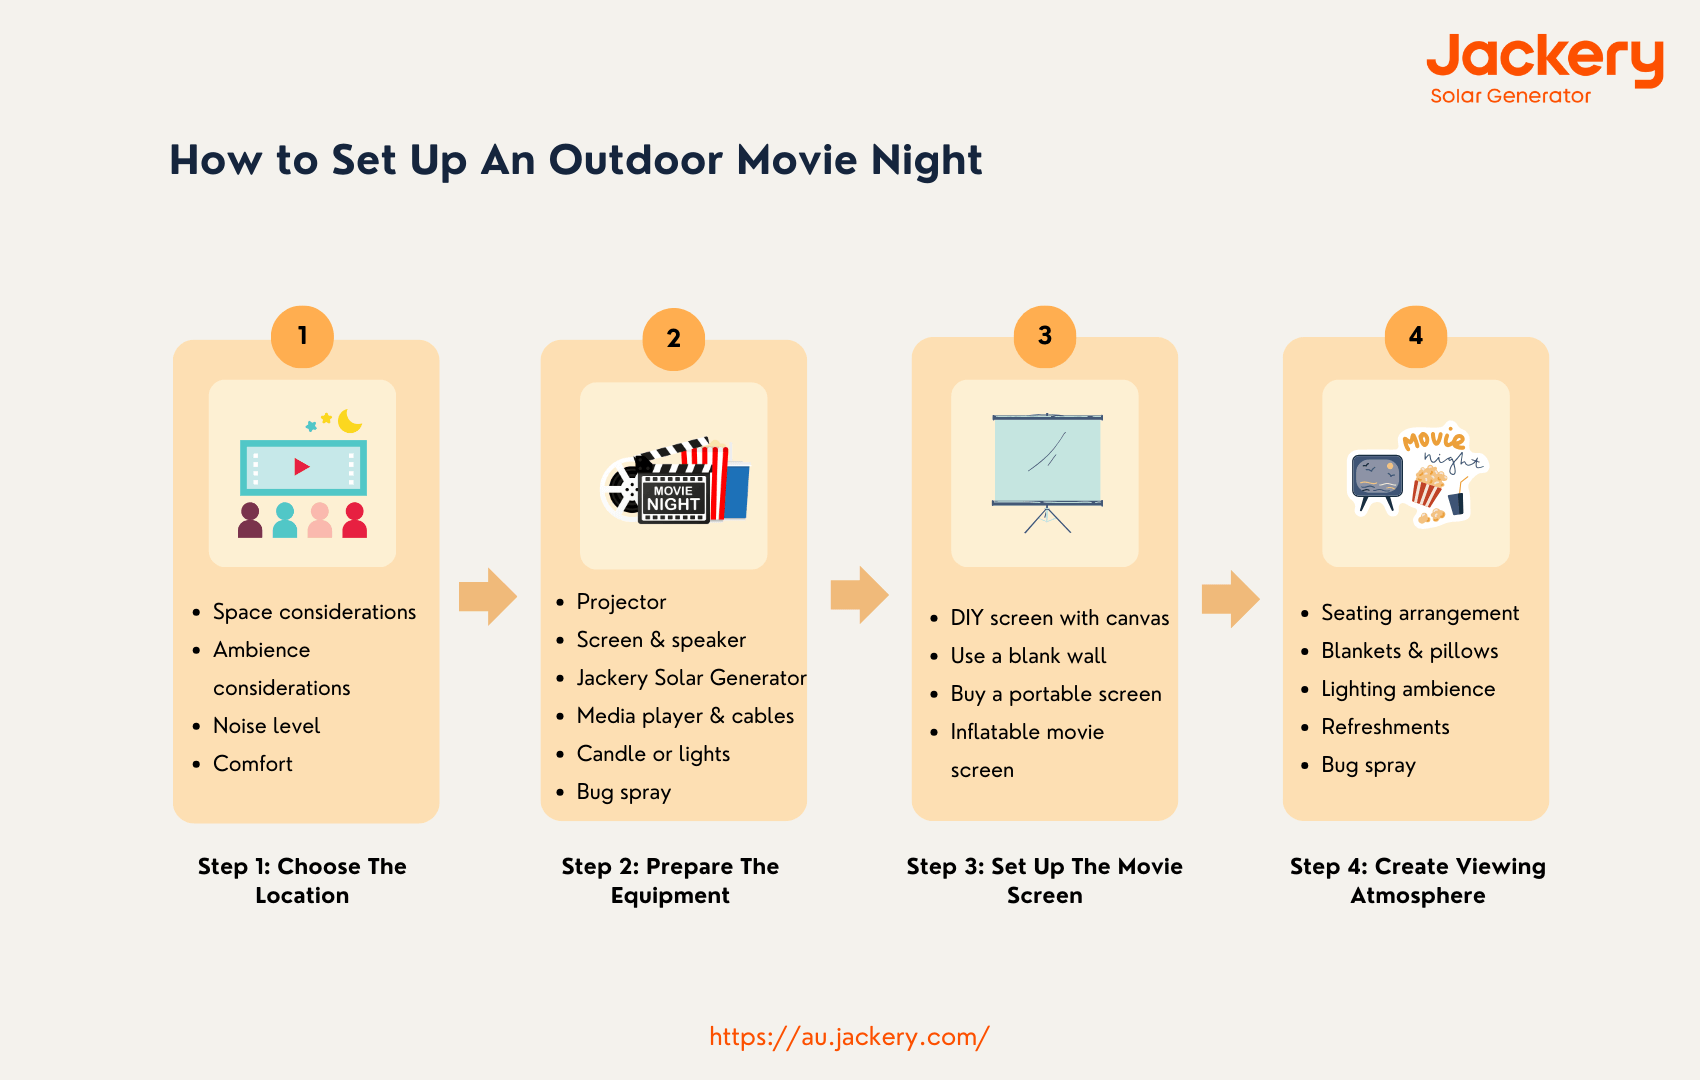 How to Set Up An Unforgettable Outdoor Movie in Australia?